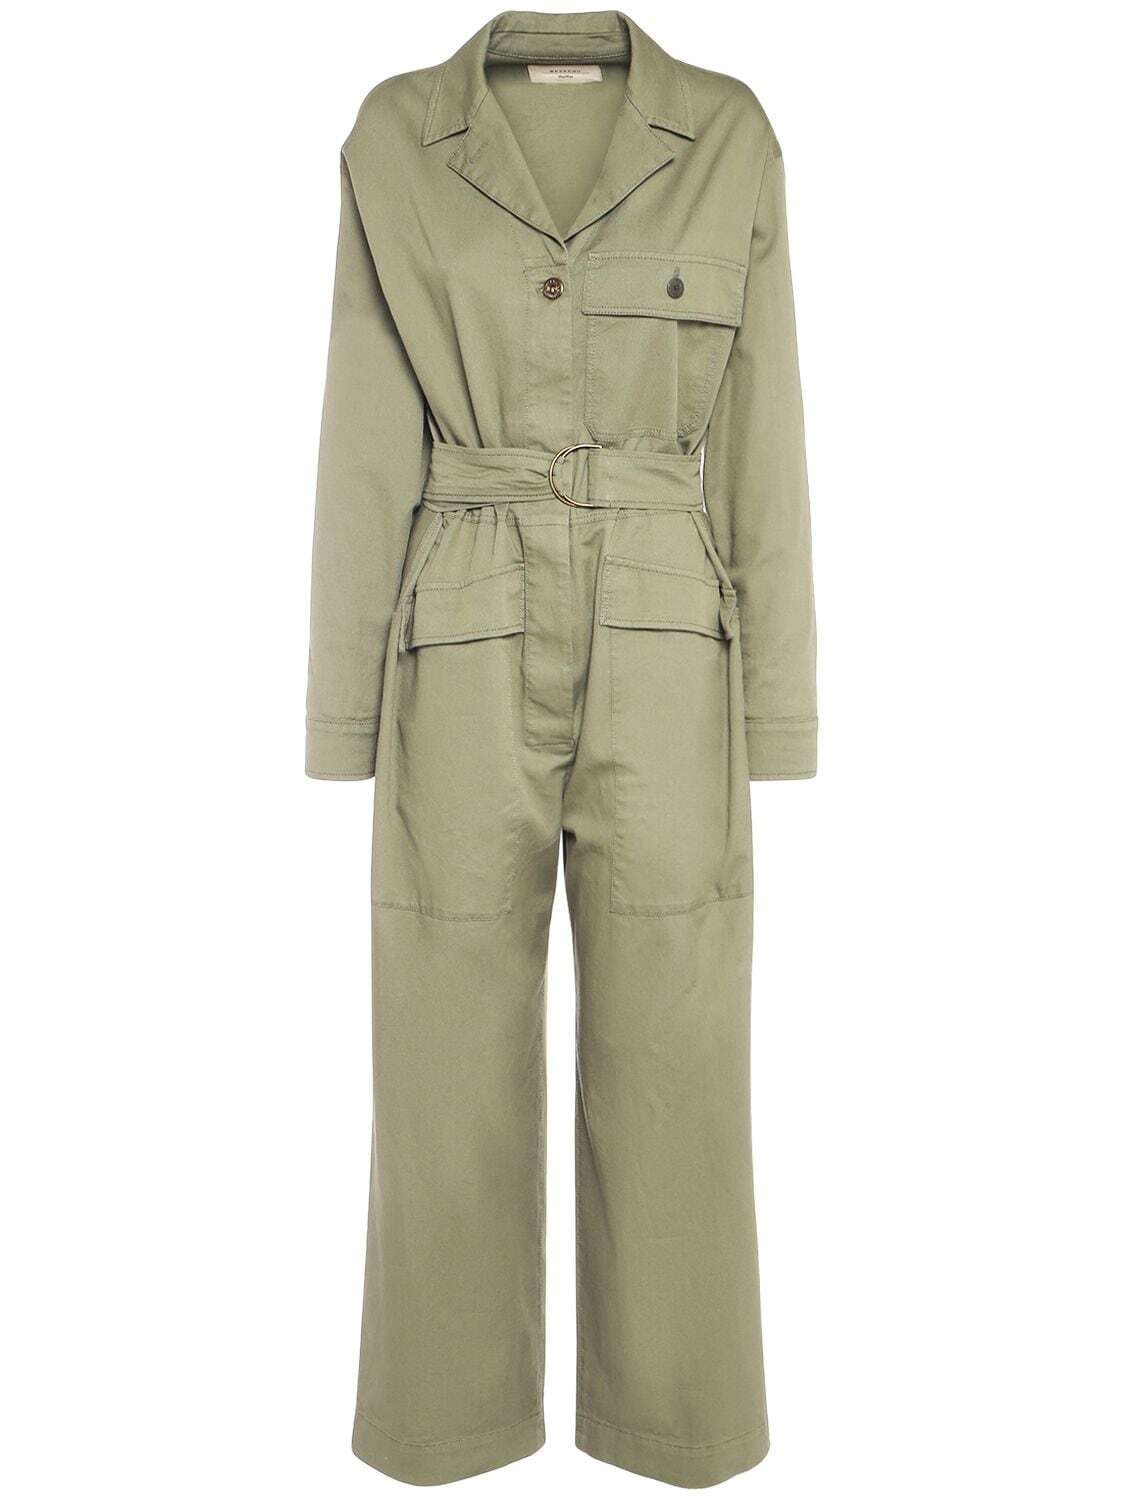 WEEKEND MAX MARA Nogal Casual Cotton Twill Jumpsuit in green